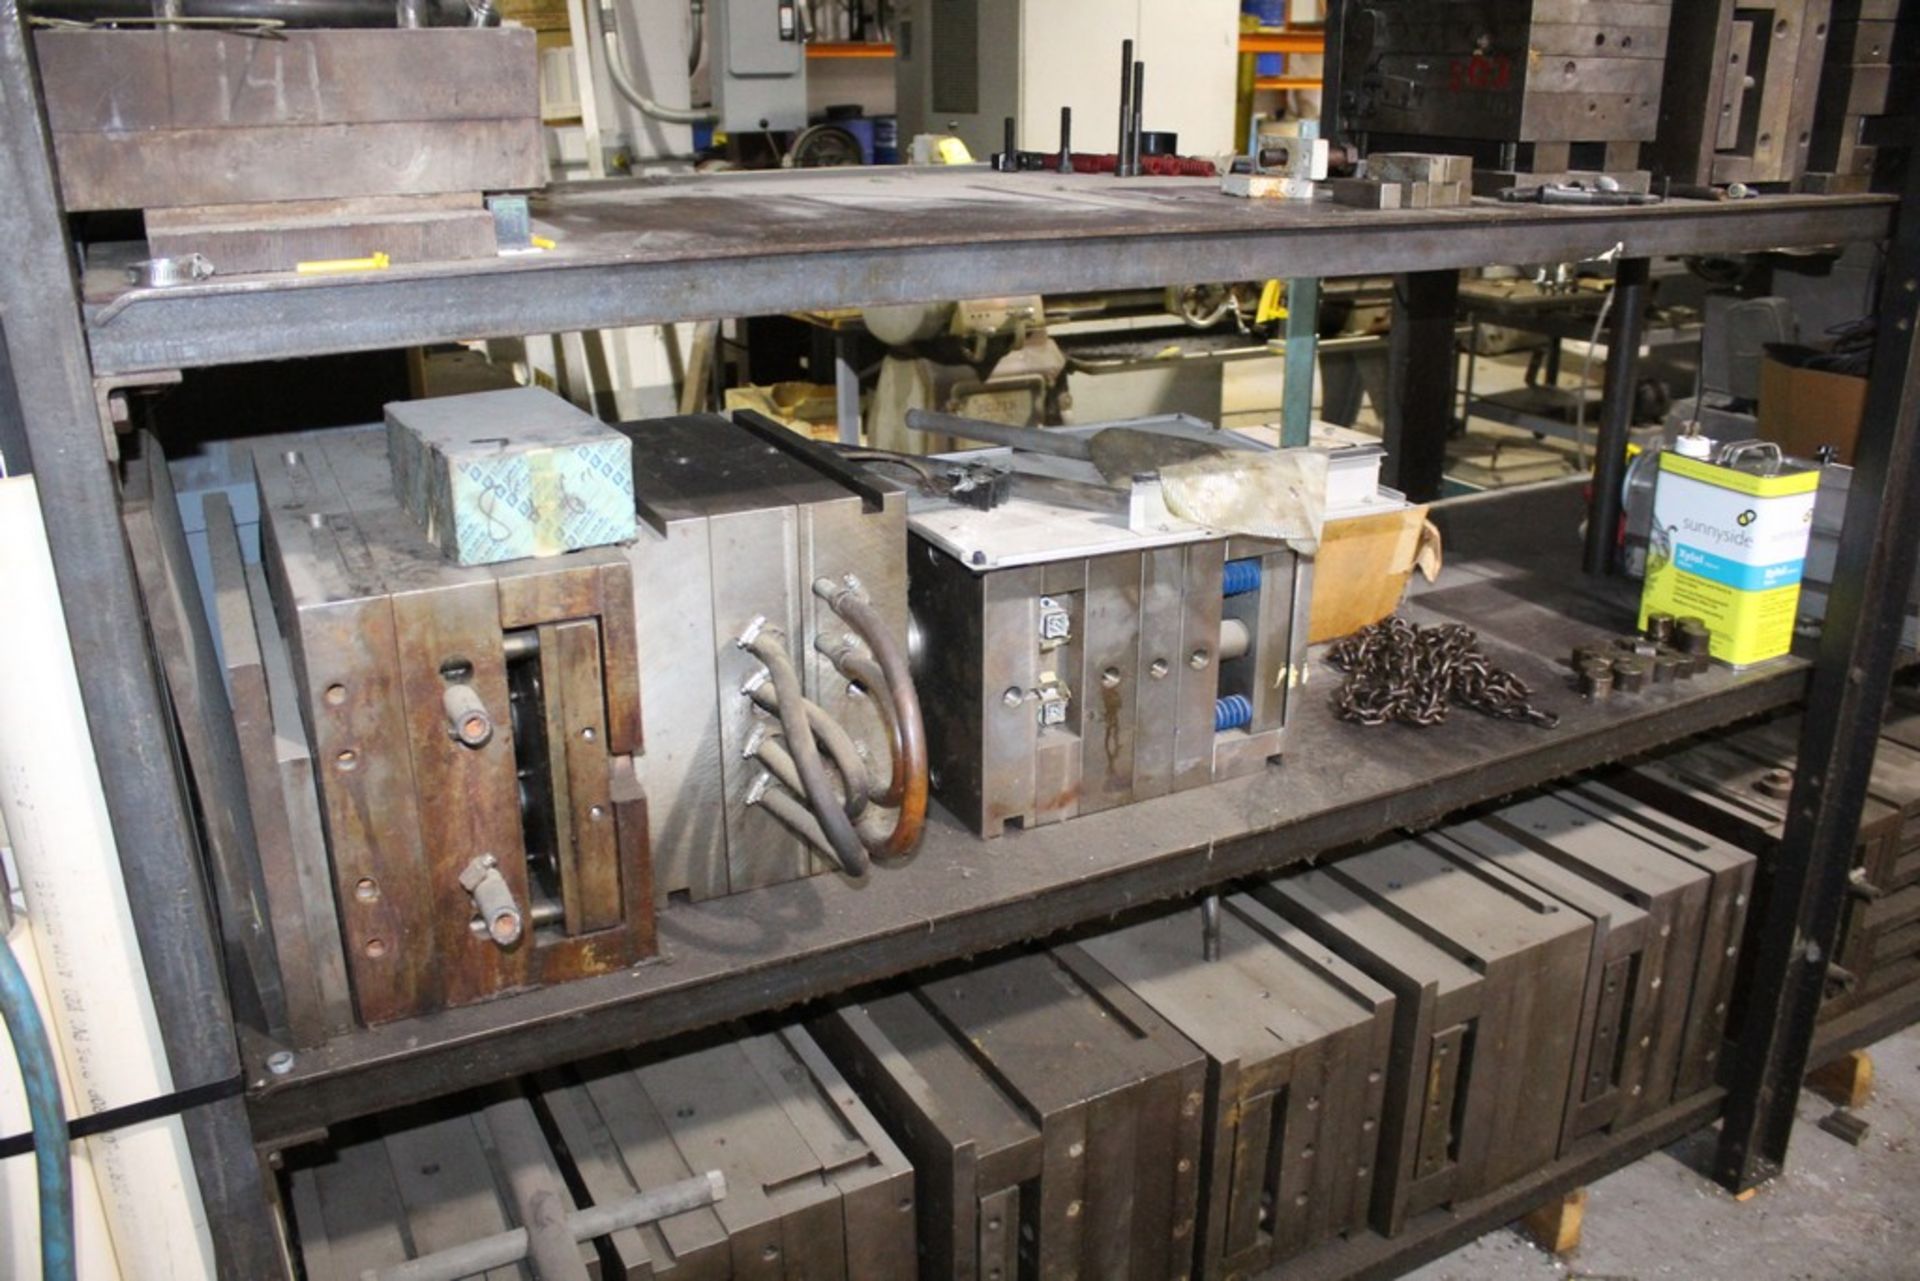 LARGE STEEL MOLD DIES AND ACCESSORIES ON (8) LOWER SHELVES - Image 3 of 6